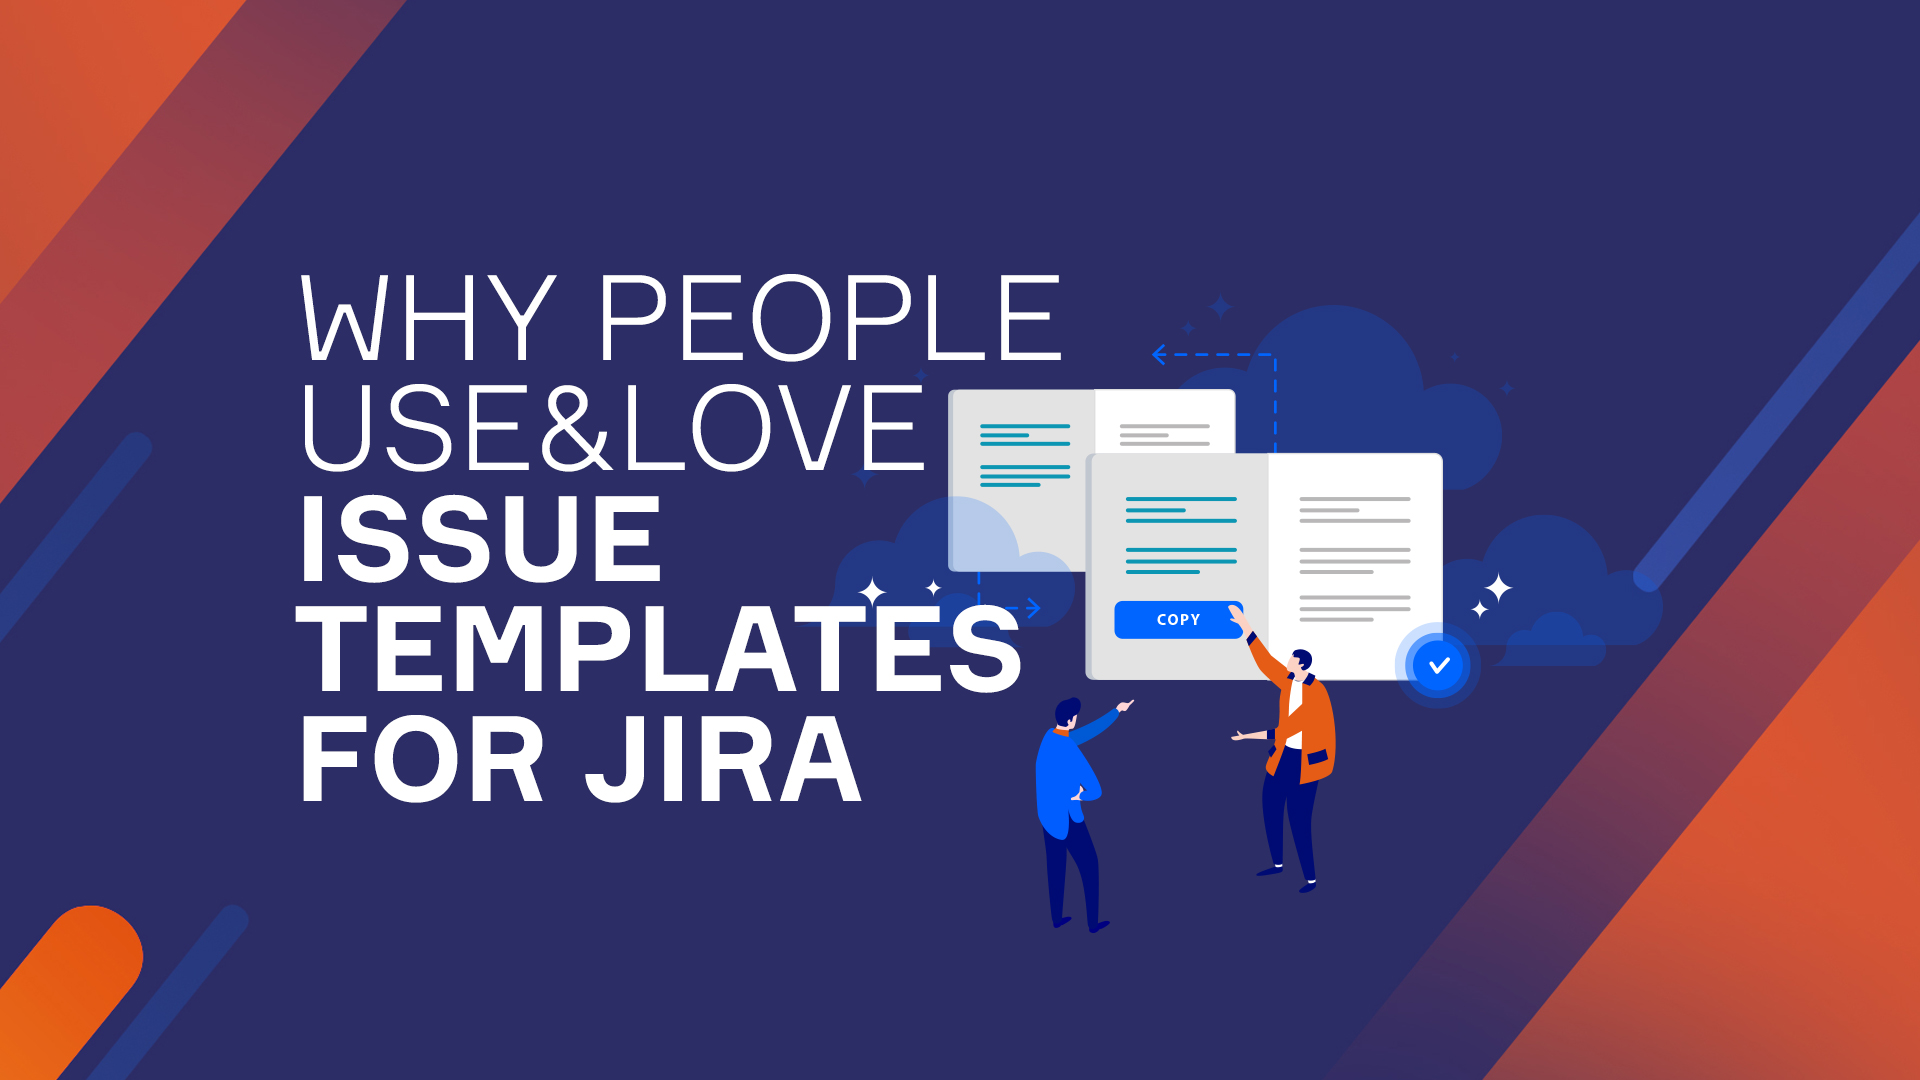 Issue love. Why always Jira. Why always them Jira. Why do people Post photos.